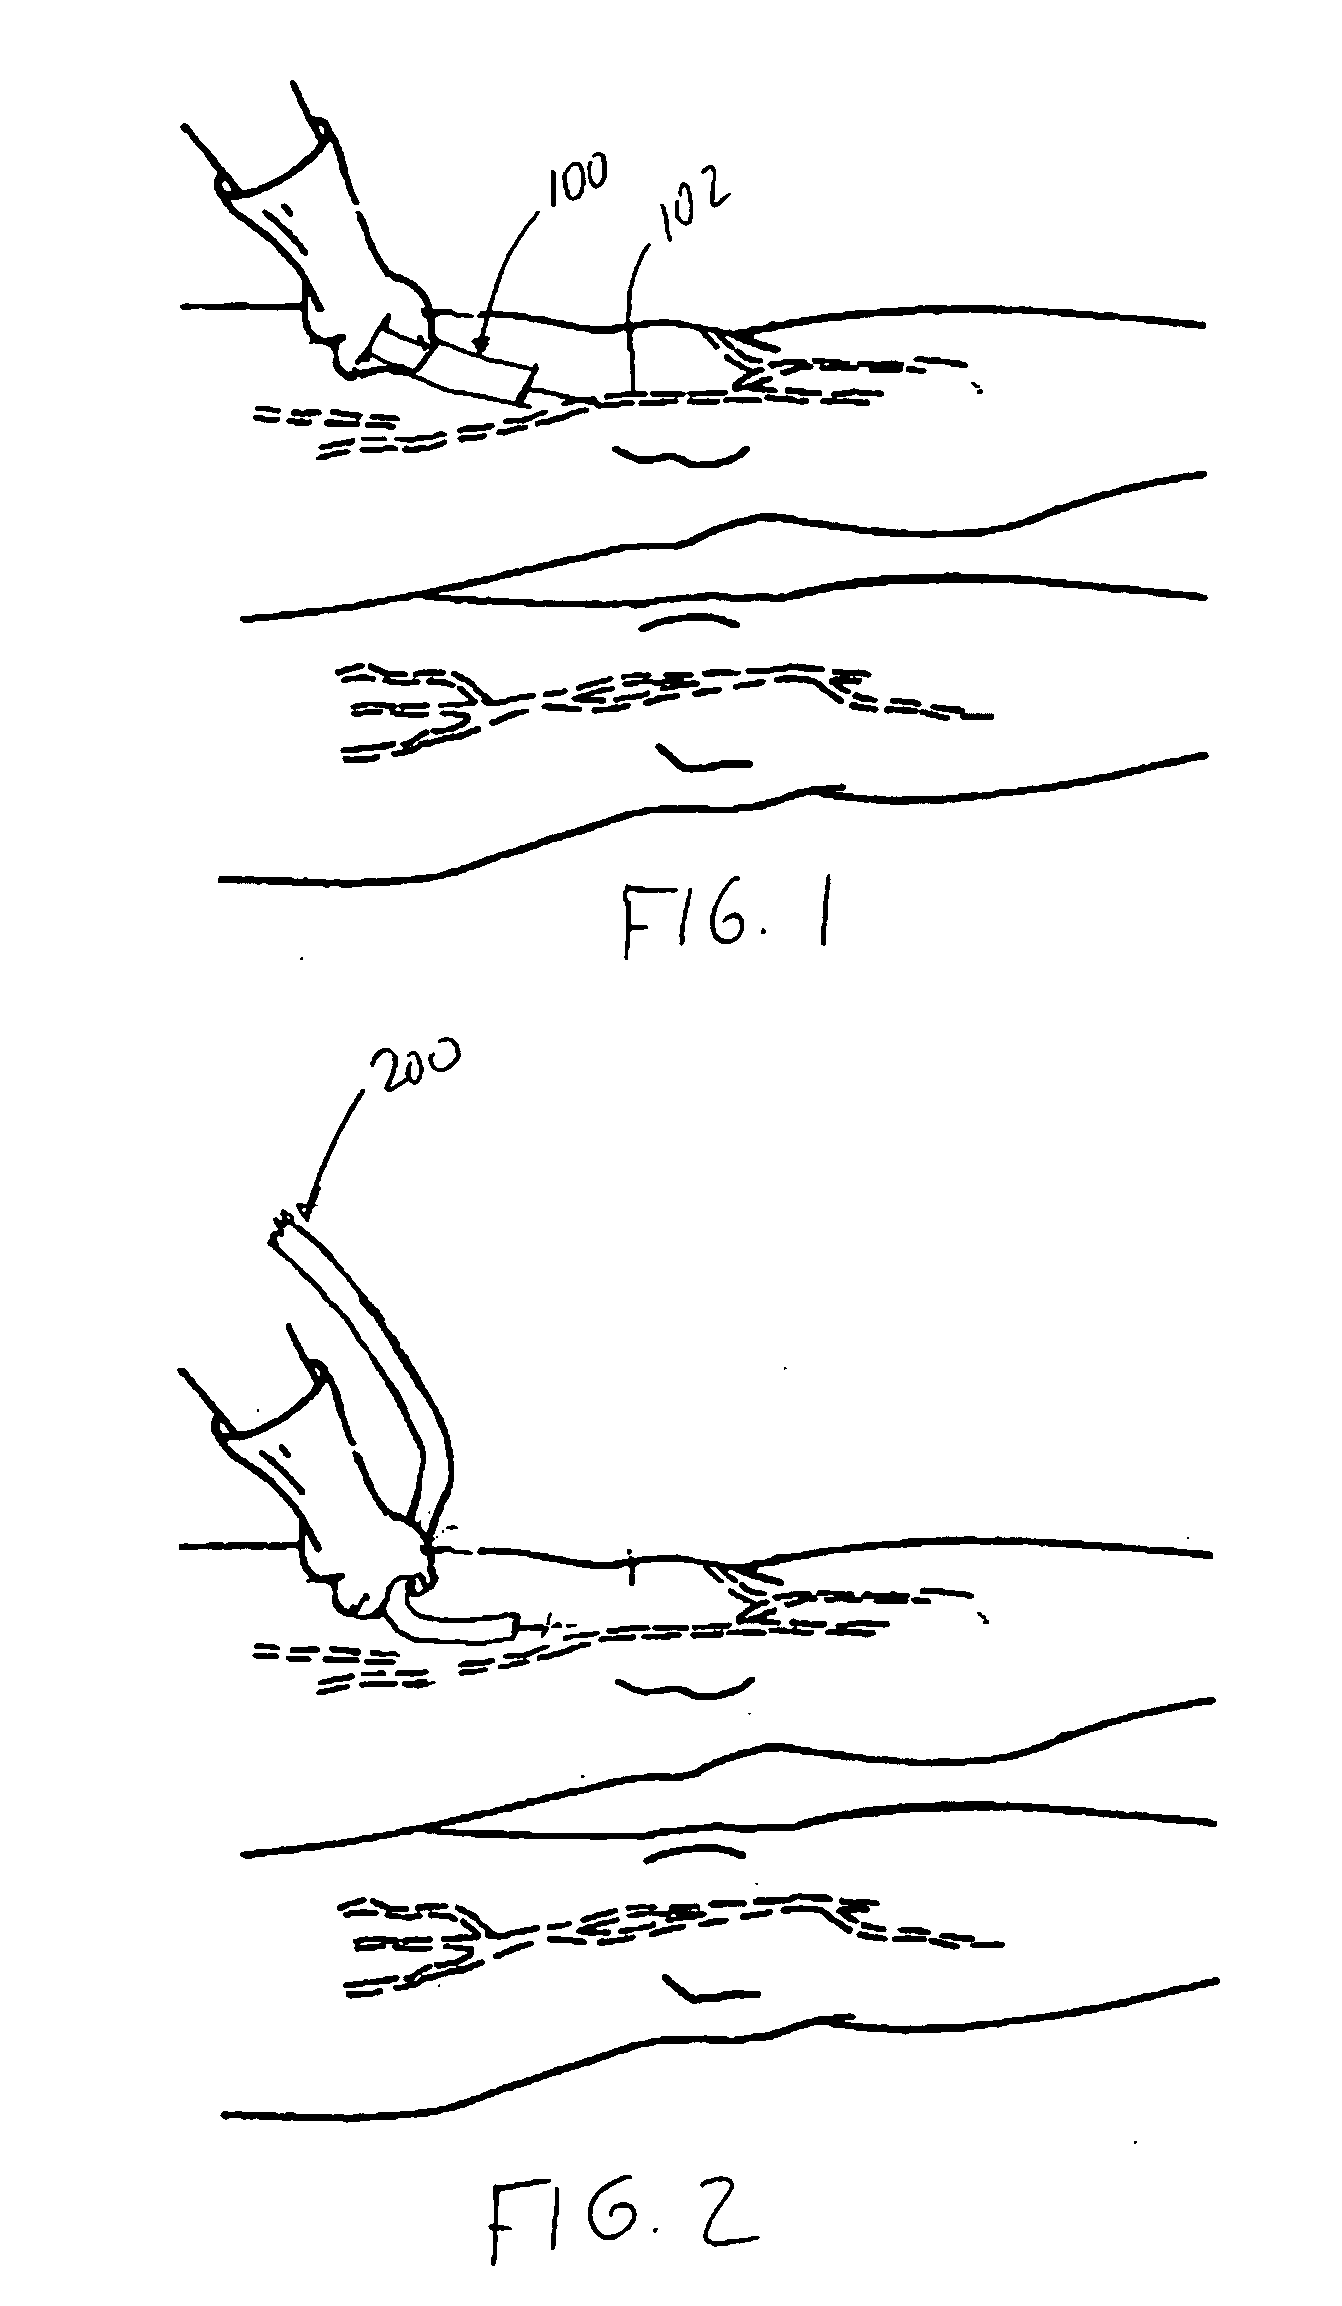 Apparatus and methods for treating undesired veins